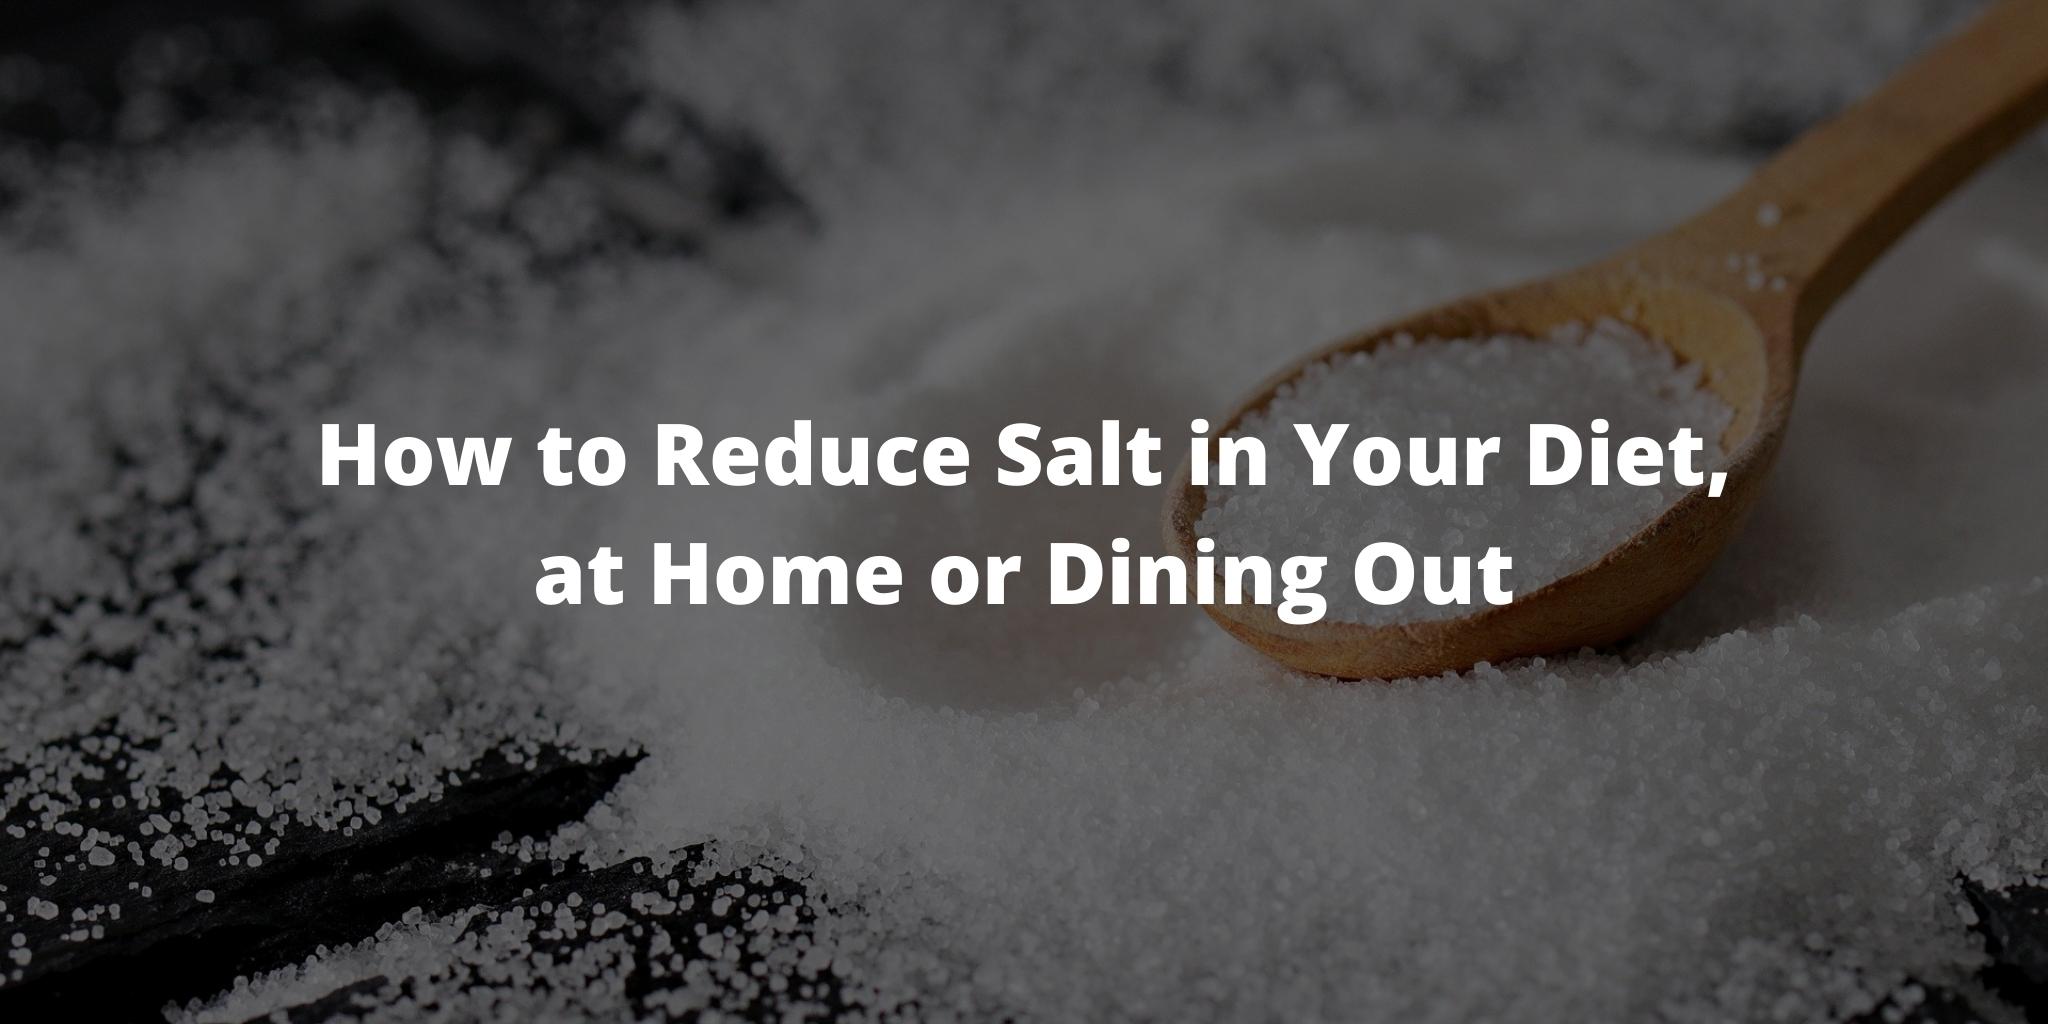 How to Reduce Salt in Your Diet, at Home or Dining Out